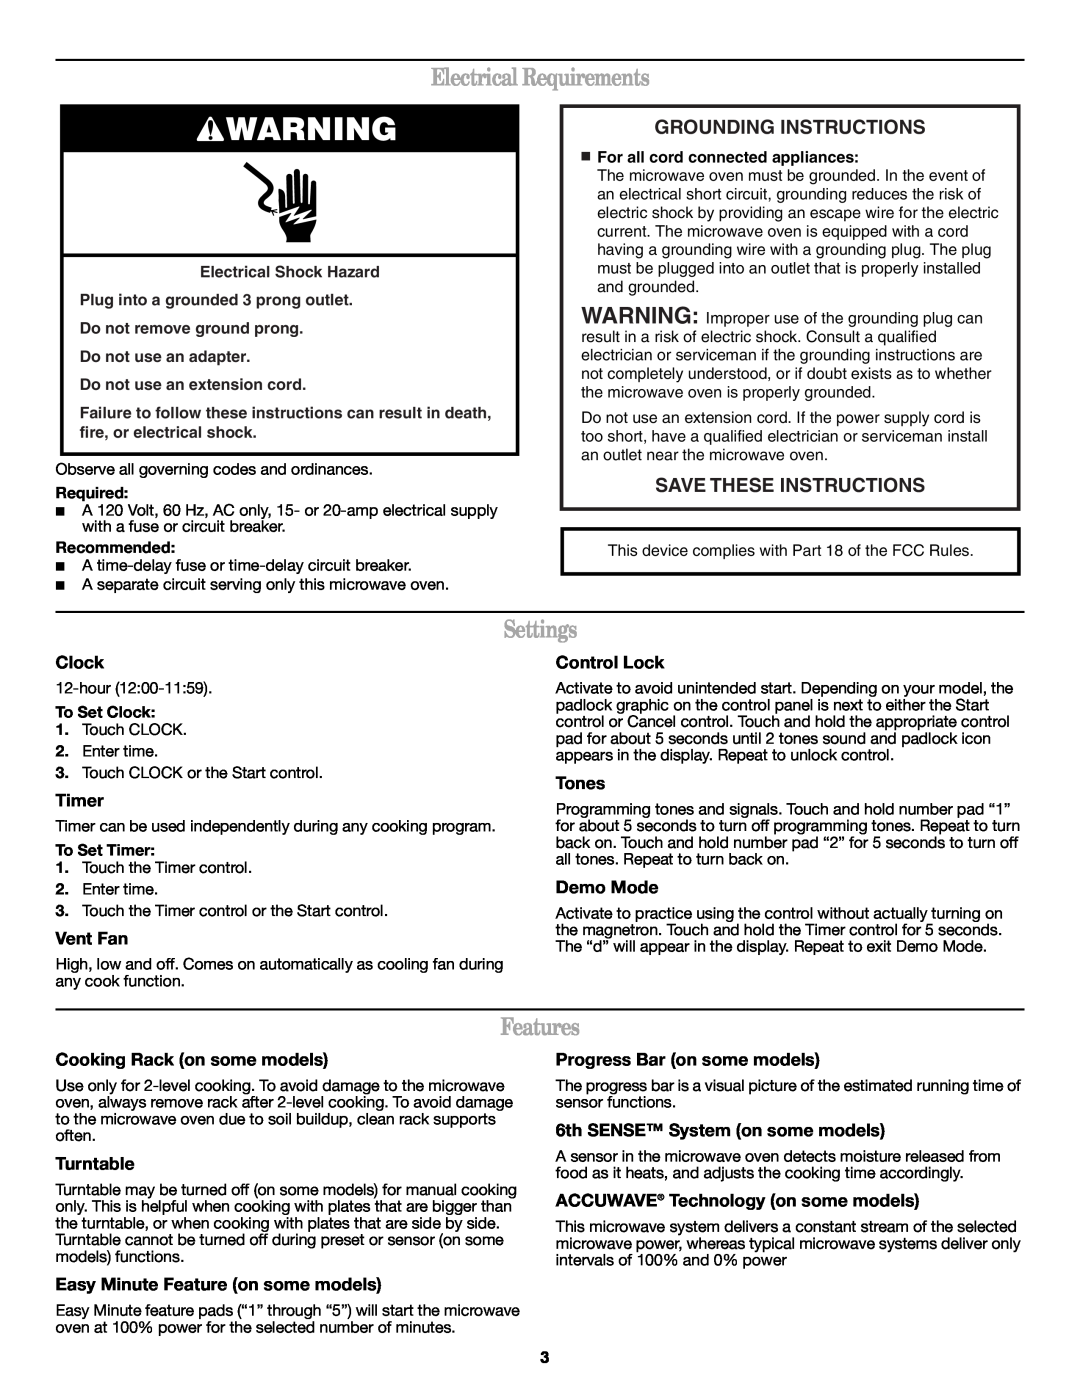 Whirlpool W10170440A Electrical Requirements, Settings, Features, Grounding Instructions, Save These Instructions 